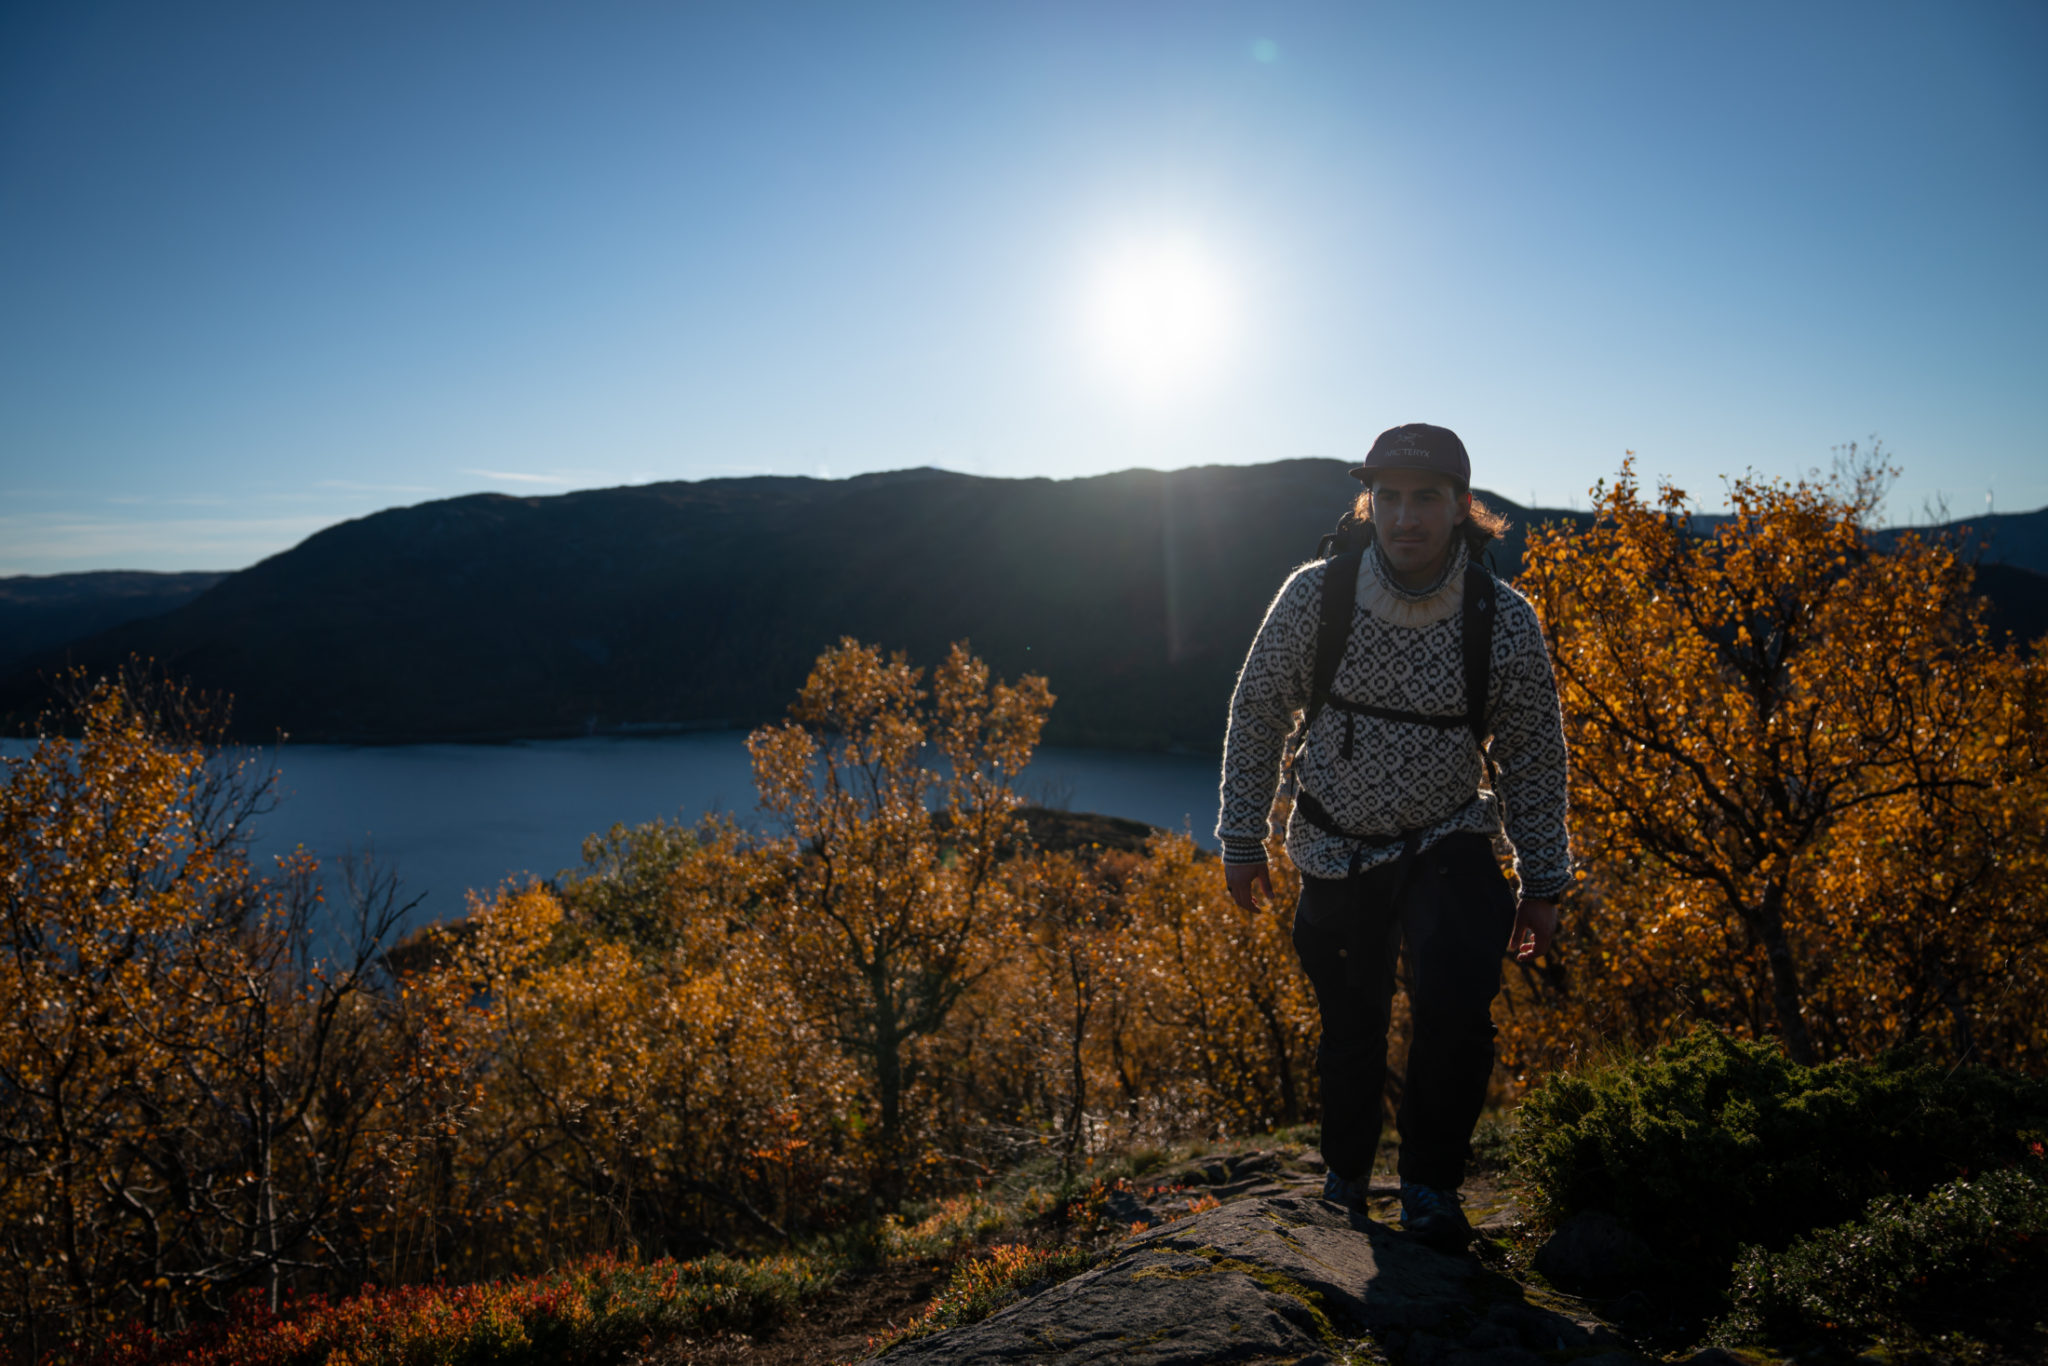 Easy hikes in the autumn landscape. ©Martin Andersen